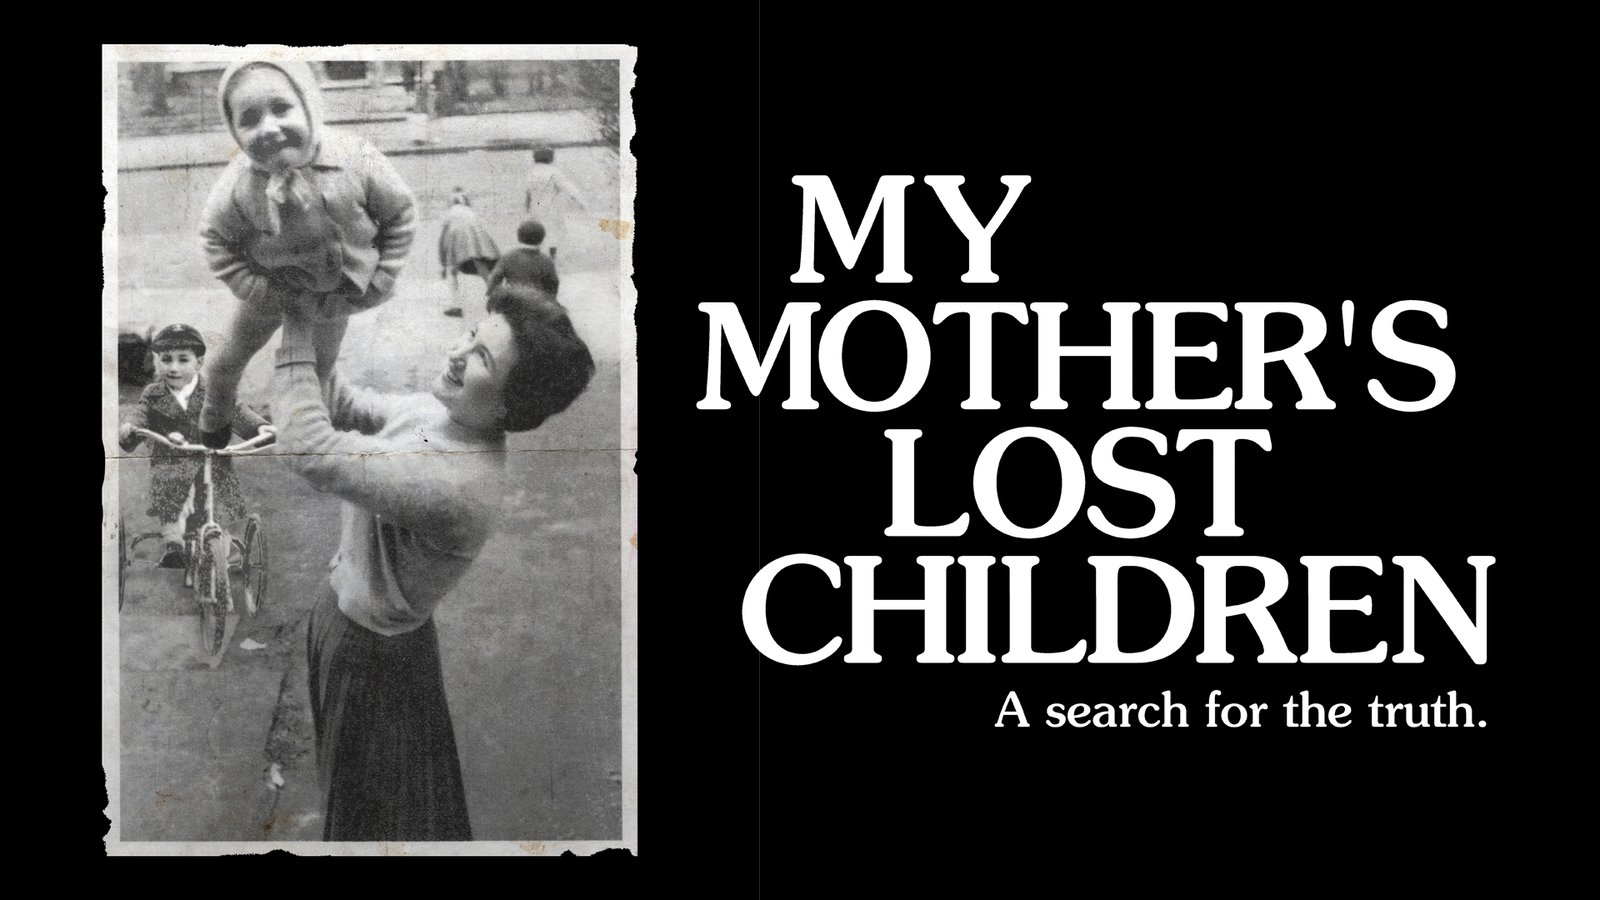 My Mother's Lost Children - Two Stolen Children Return Home After Forty Years